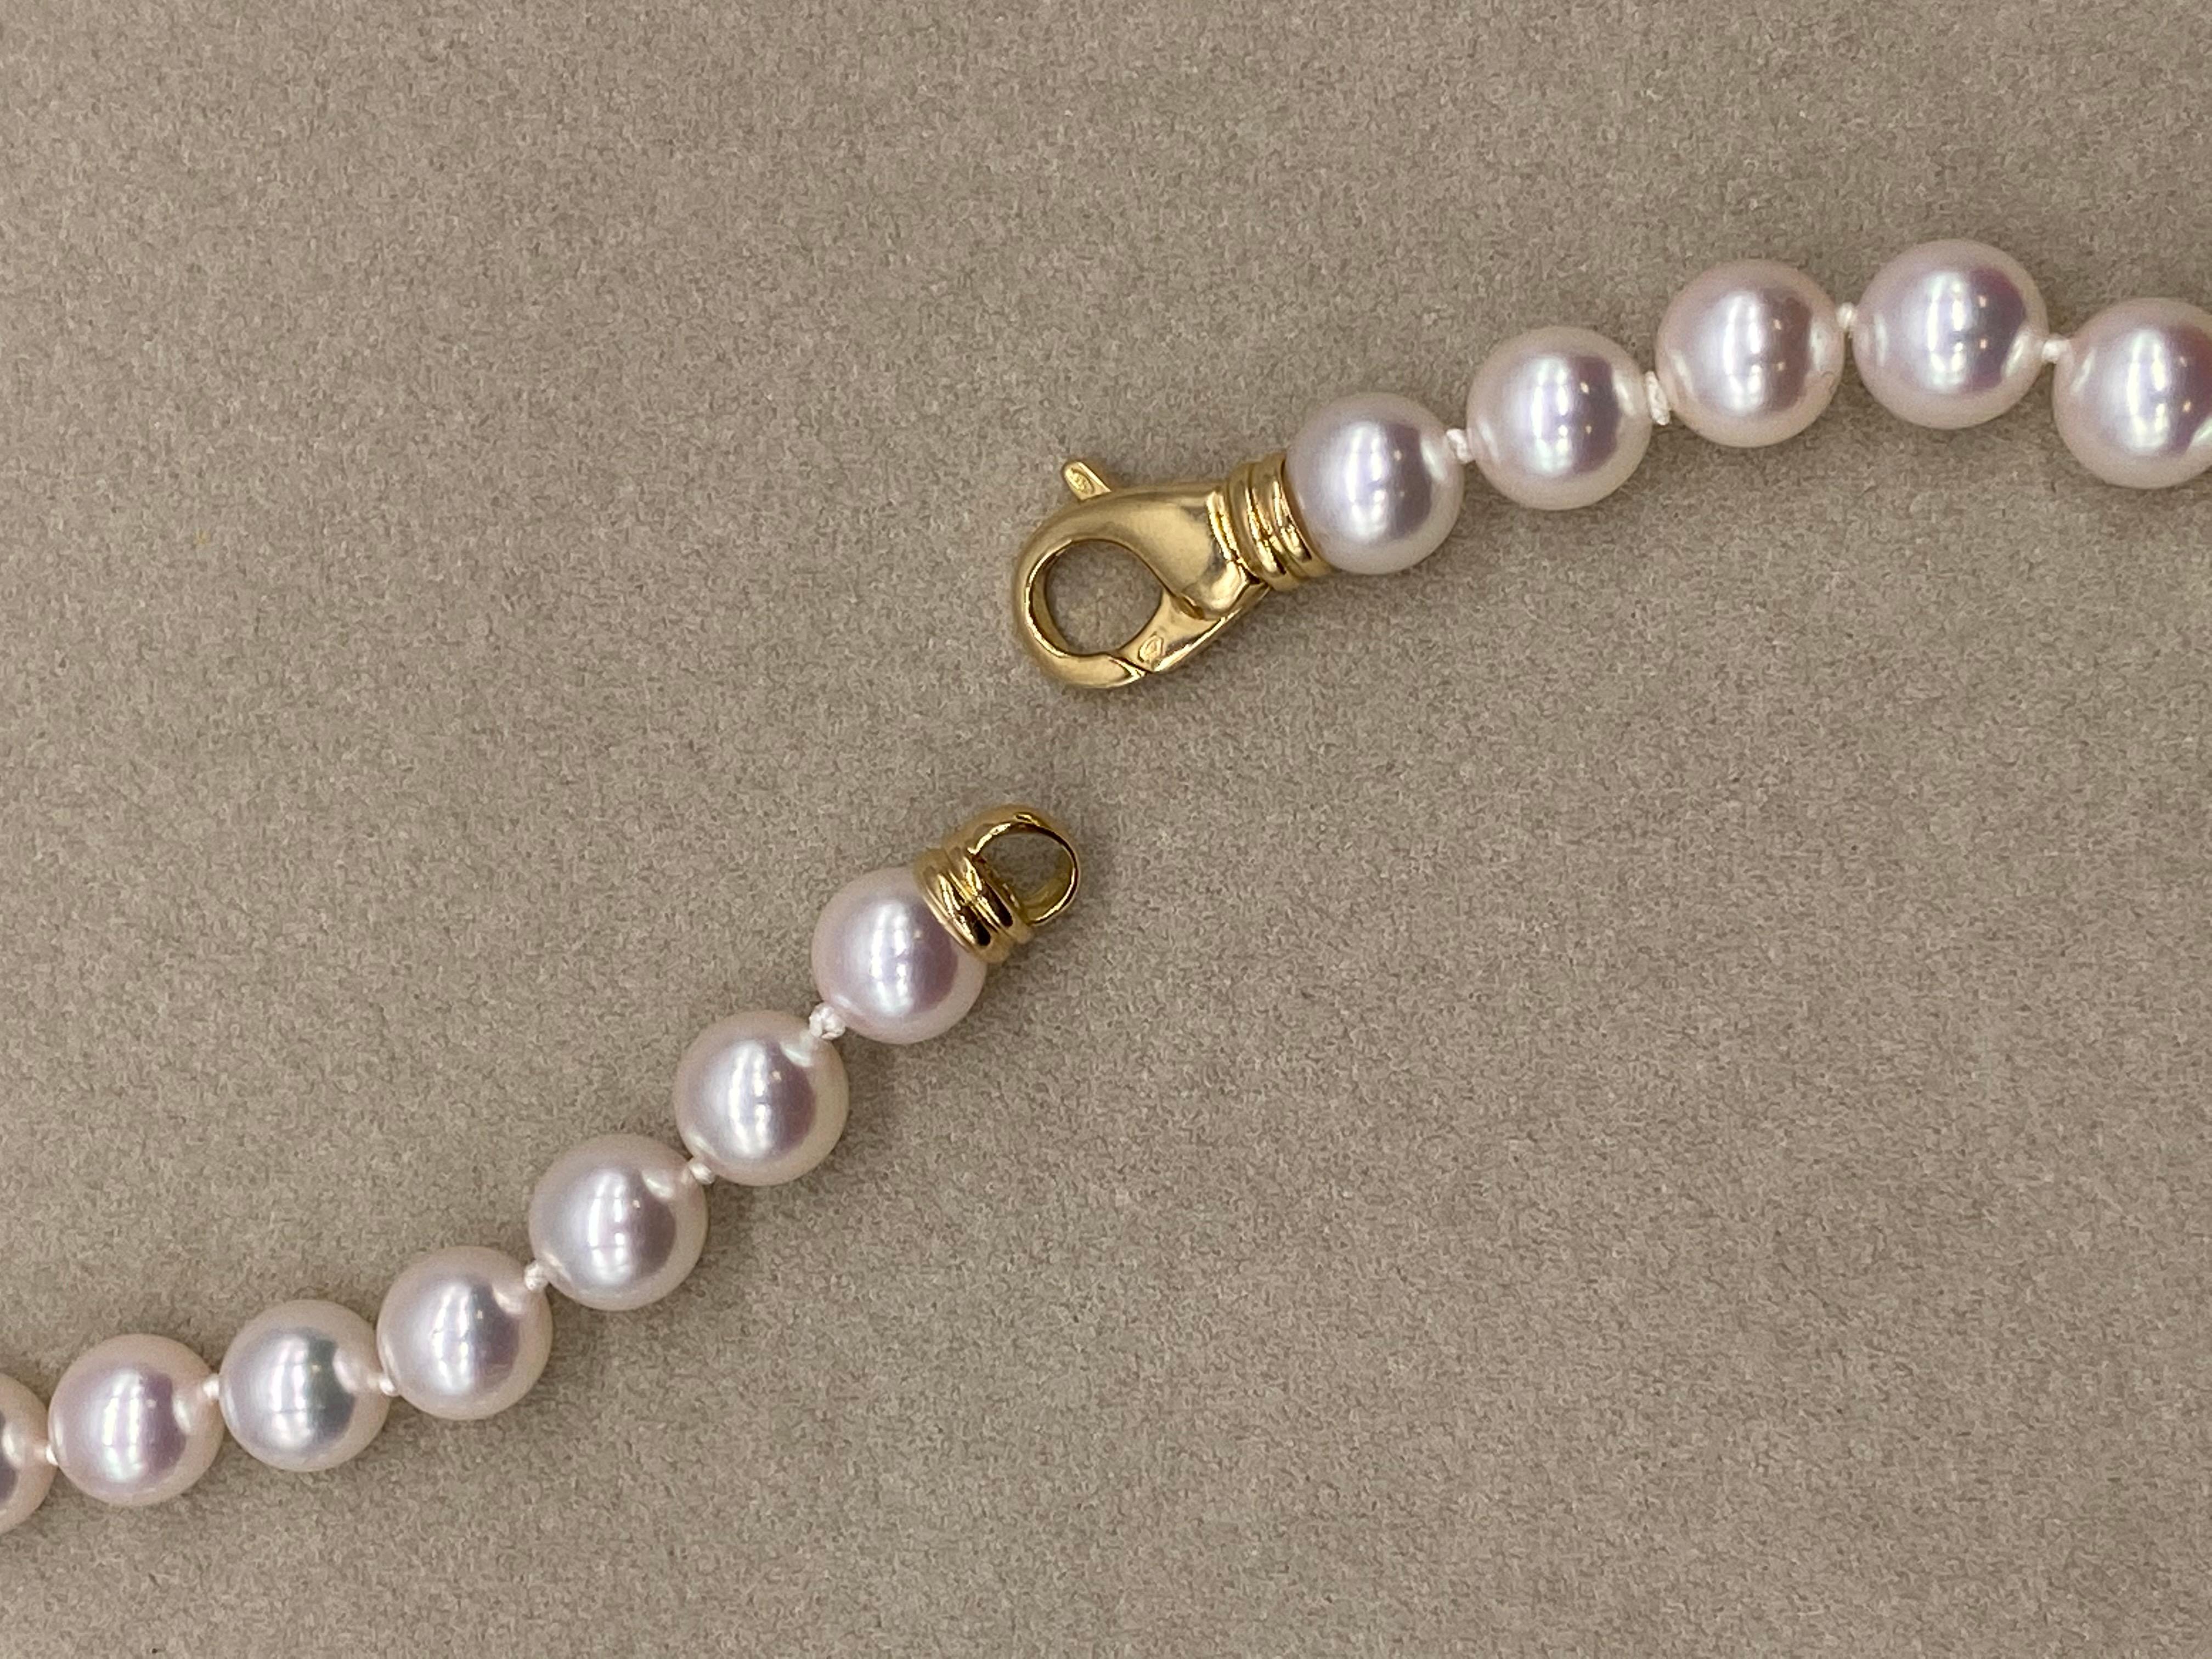 Discover this magnificent Akoya pearl necklace, a true symbol of grace and sophistication. Akoya pearls, renowned for their natural brilliance and impeccable finish, have been appreciated for centuries for their timeless beauty. This necklace is a